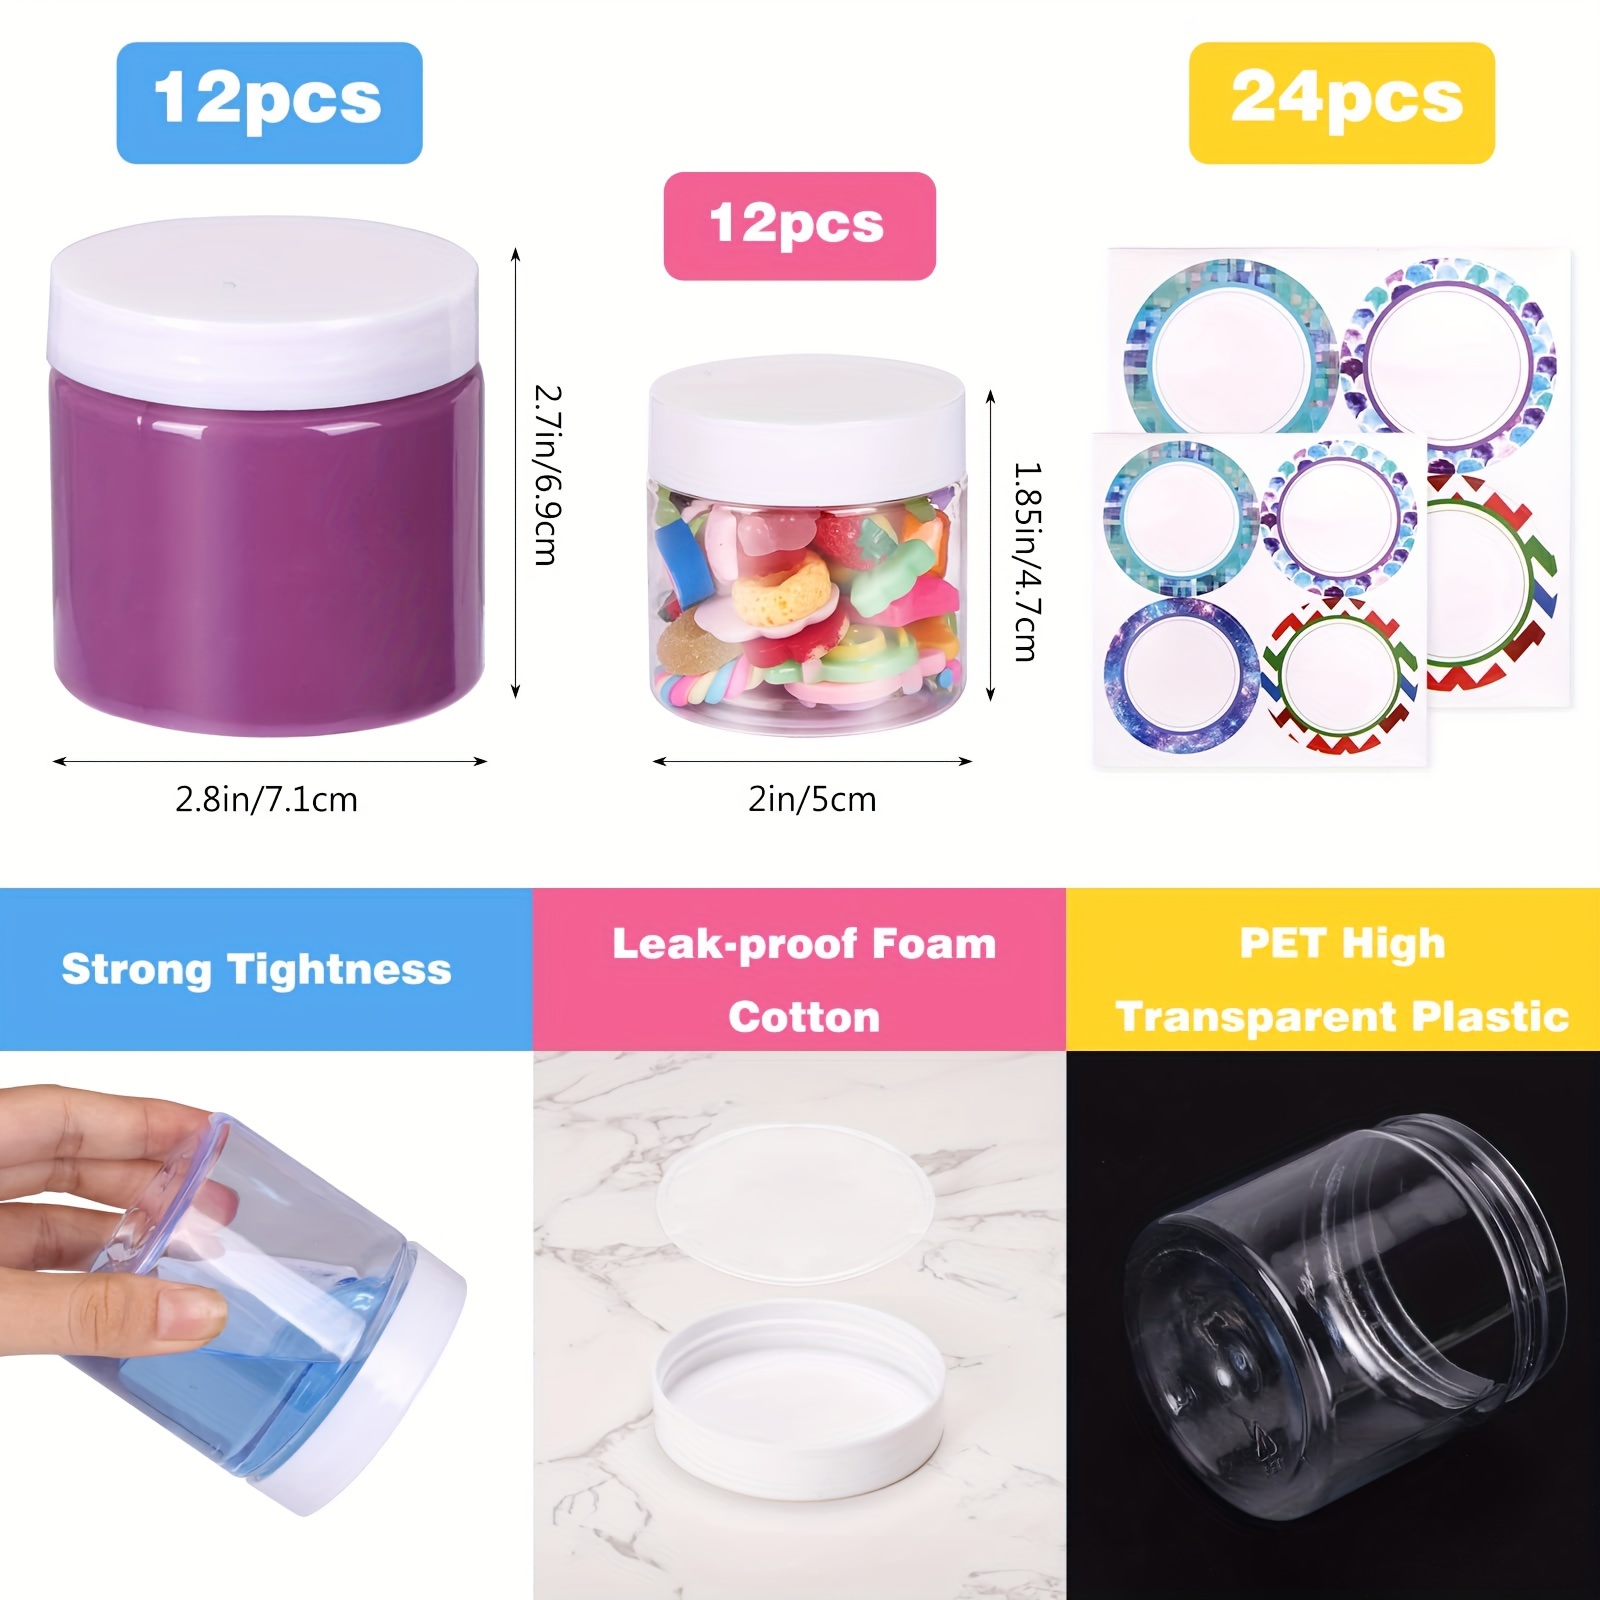 SEVEN STYLE 12 PCS 8 Oz Clear Empty Slime Storage Containers